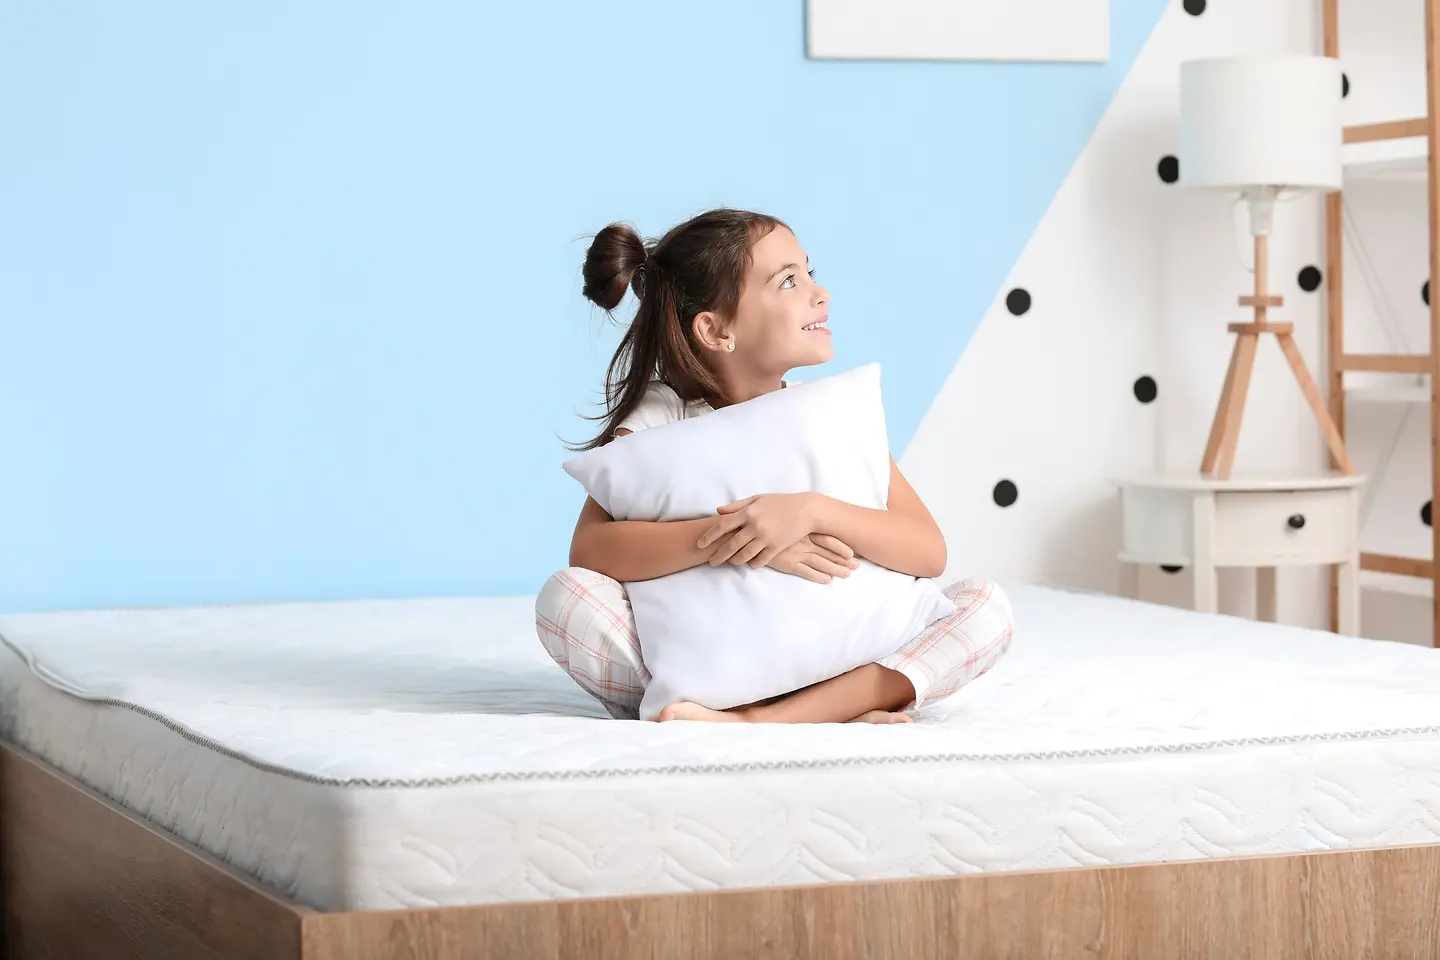 
Adhesive Technologies will be exhibiting at Interzum and demonstrating its expertise in the mattress sector, showcasing its latest innovations and solutions.